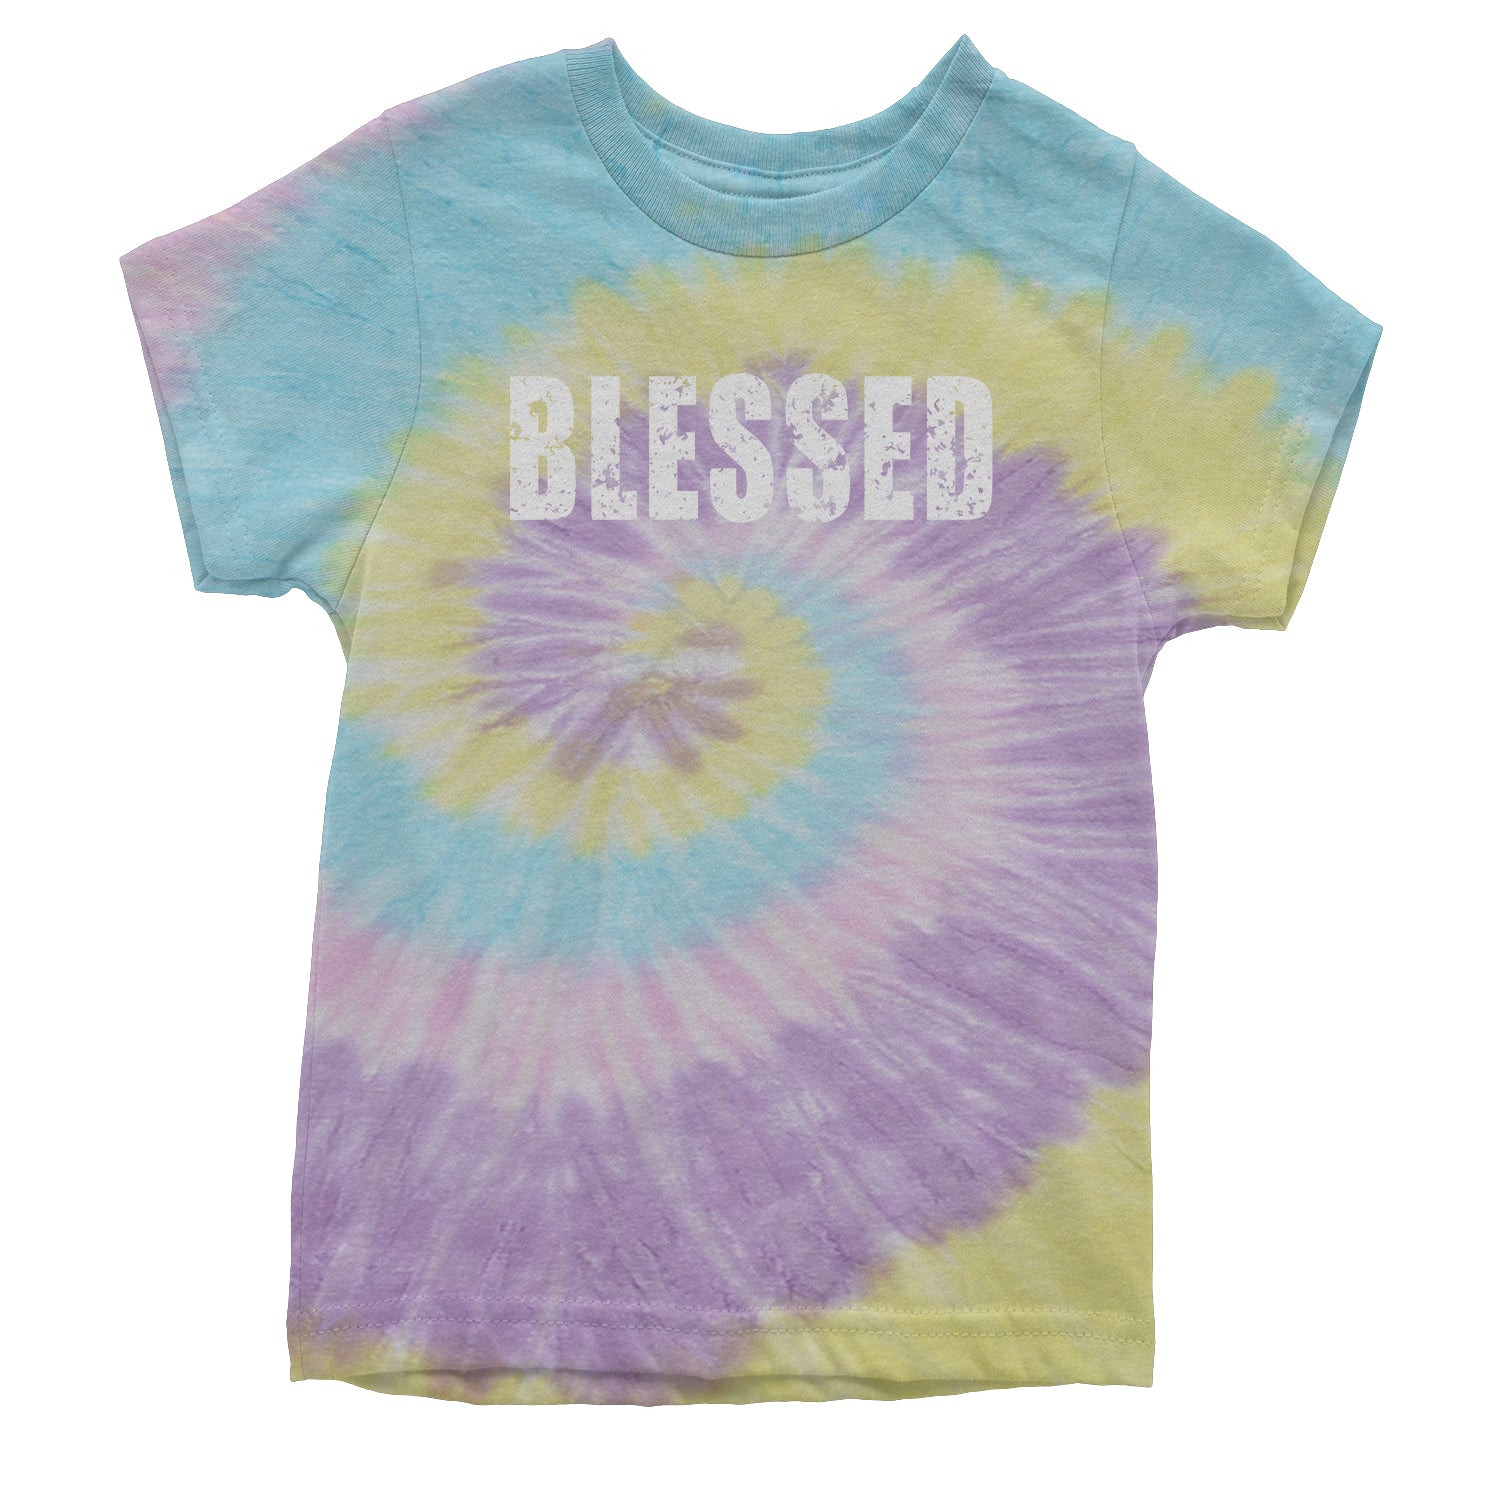 Blessed Religious Grateful Thankful Youth T-shirt #expressiontees by Expression Tees